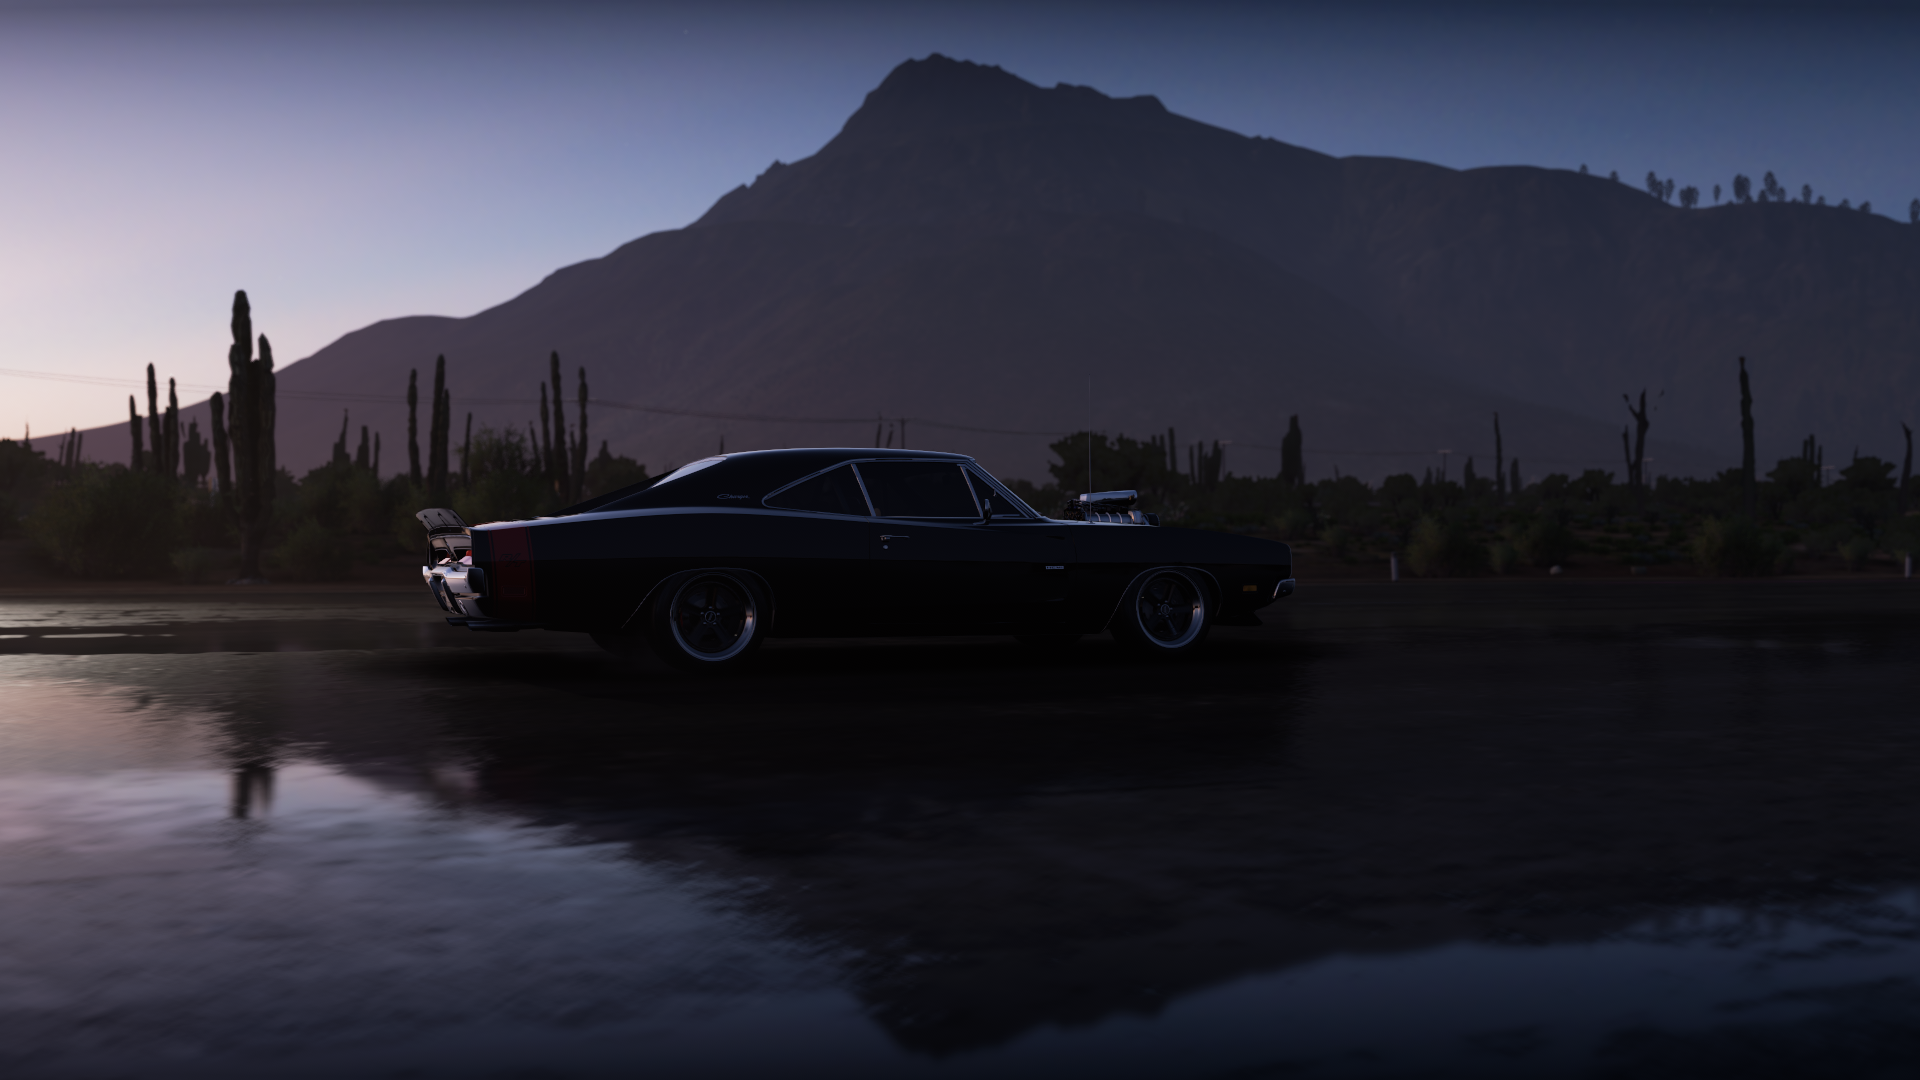 General 1920x1080 Forza Horizon 5 video games dark car Dodge Charger muscle cars American cars PlaygroundGames sky supercharger vehicle sunset sunset glow Dodge mountains video game art CGI